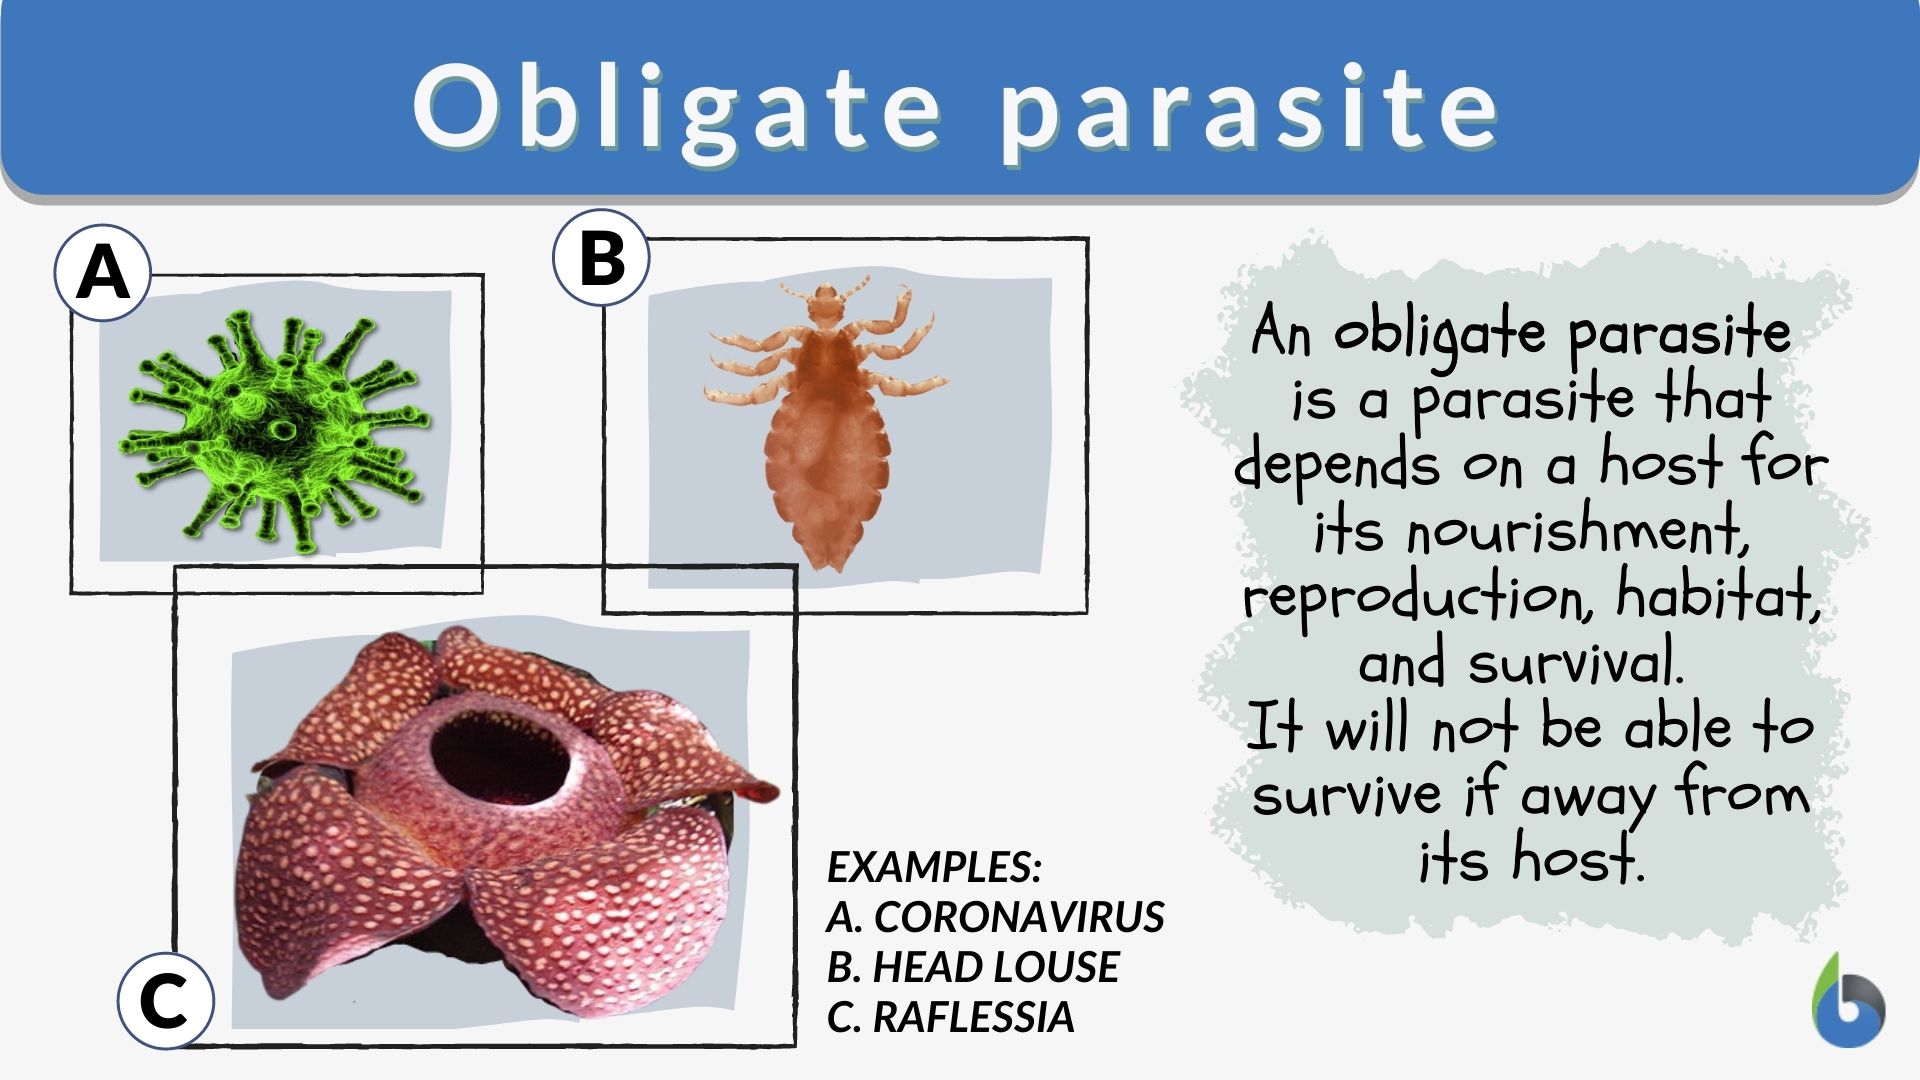 Obligate parasite - Definition and Examples - Biology Online Dictionary